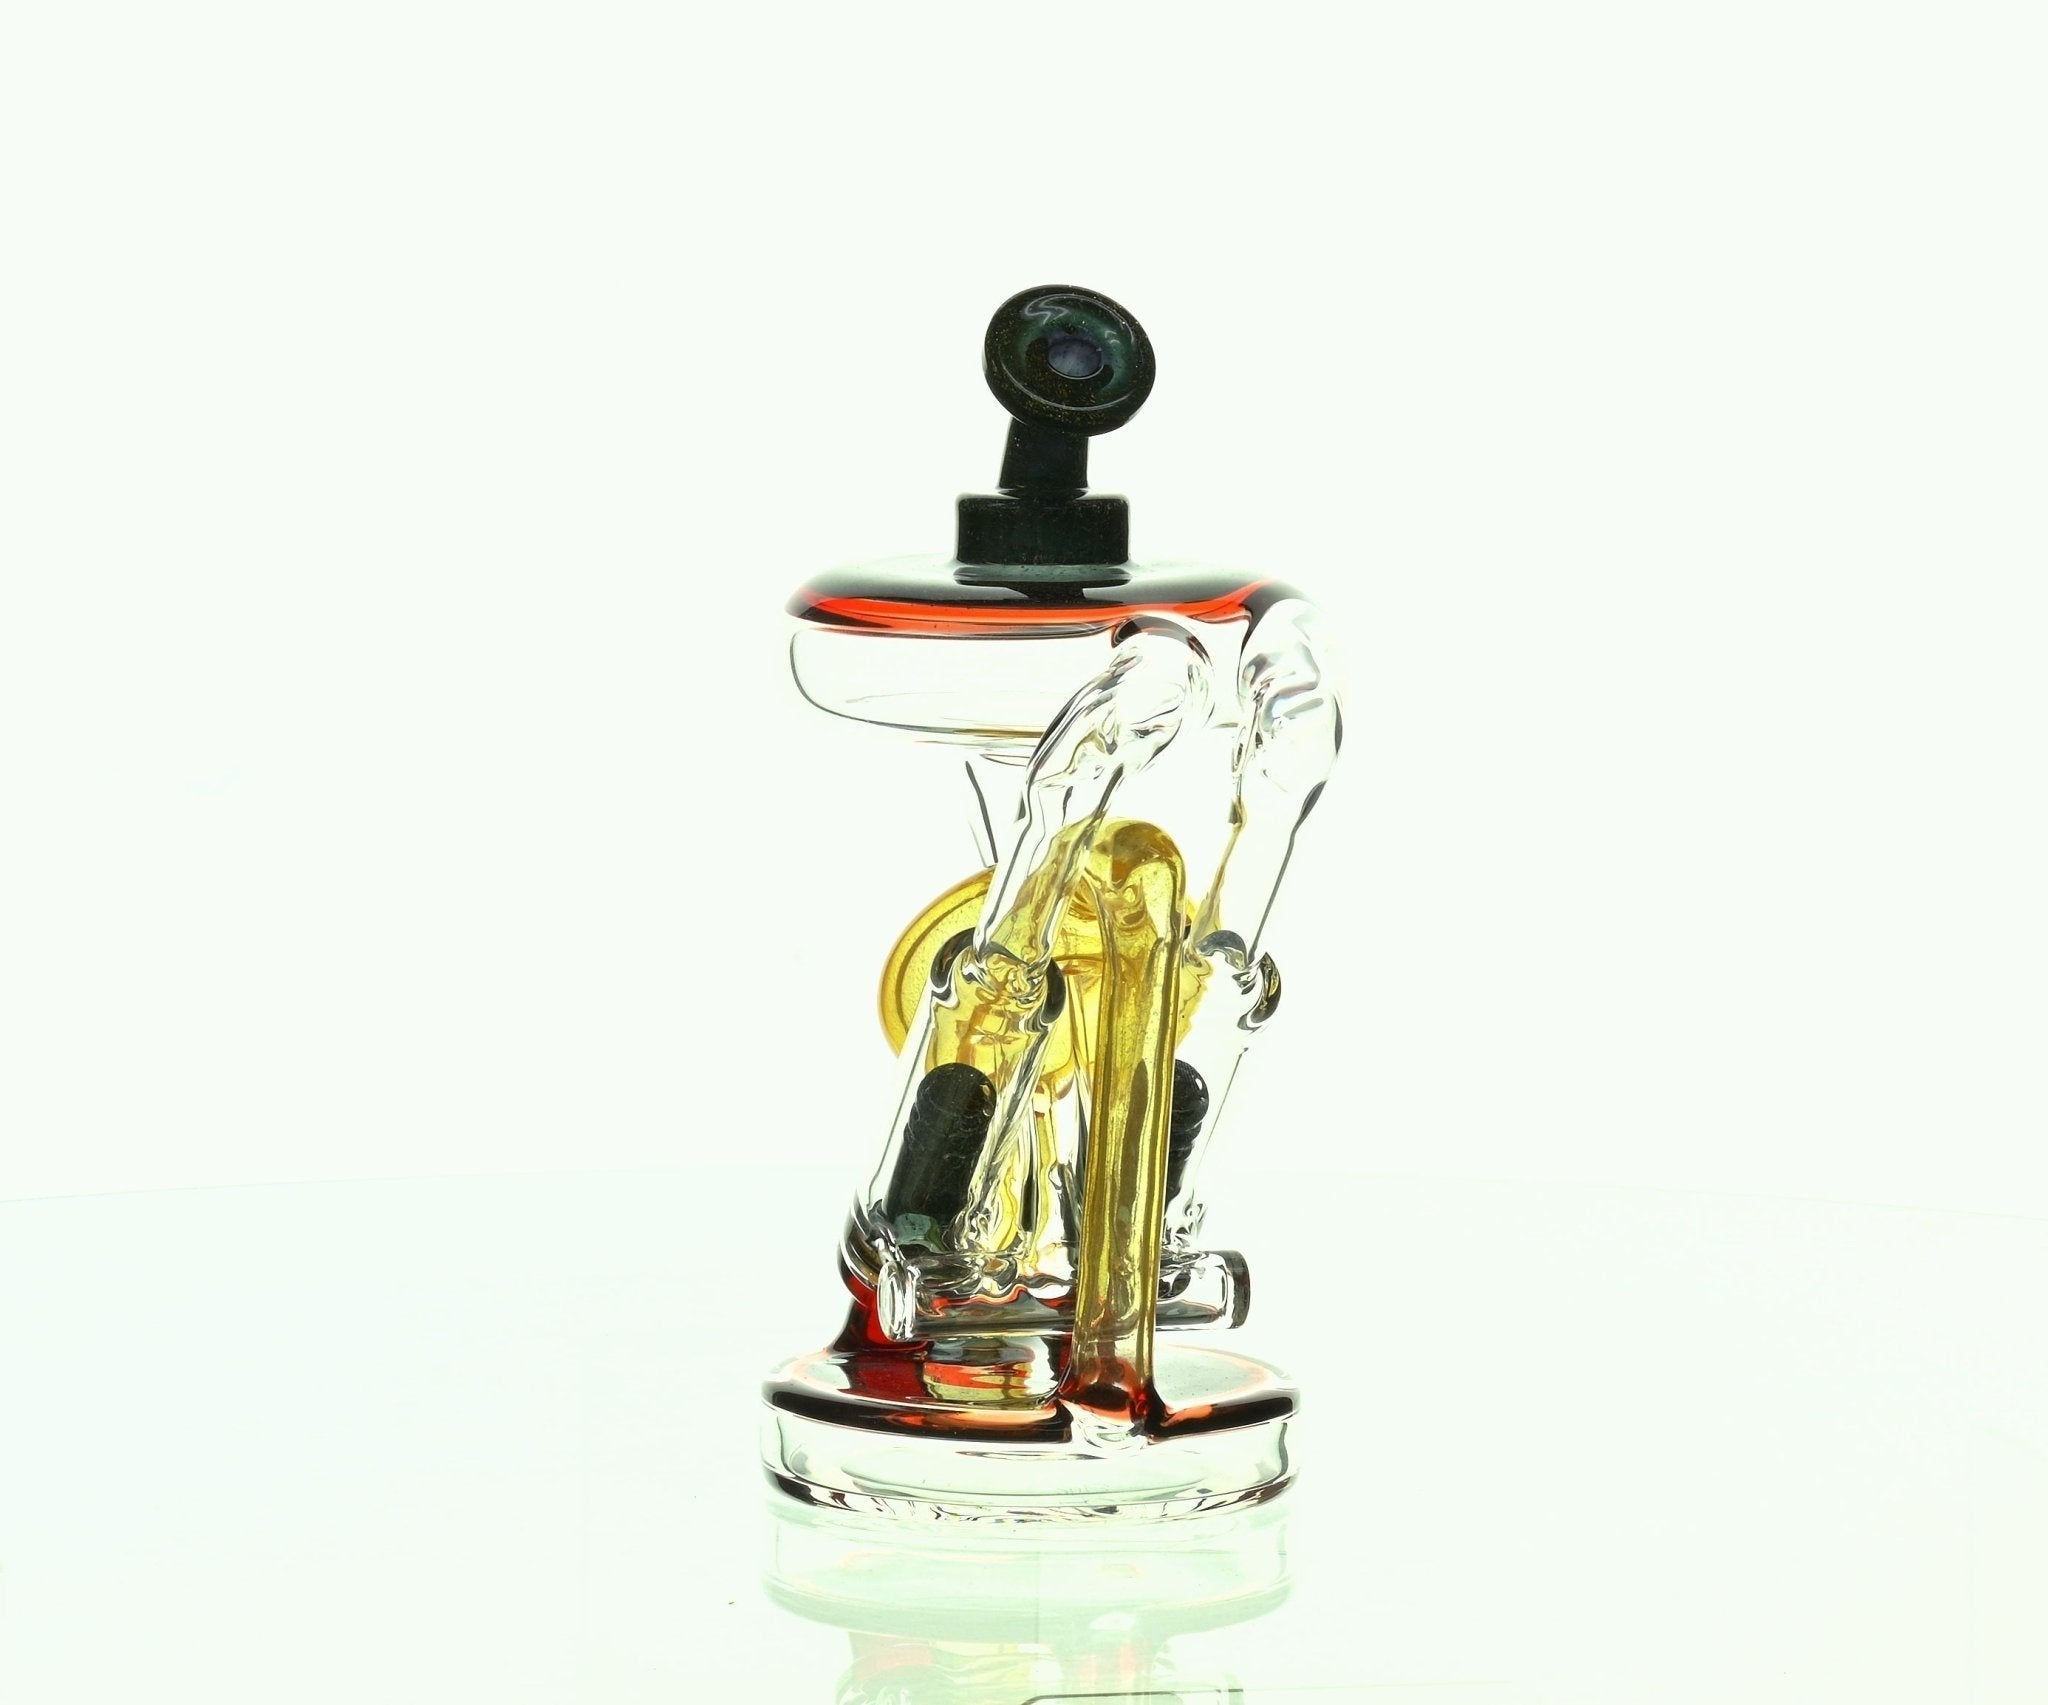 NIB GLASS YELLOW & RED DICRO PARTIAL COLOR PISTON RIG BLACK/CANARY & POMEGRANATE ACCENTS - SSSS